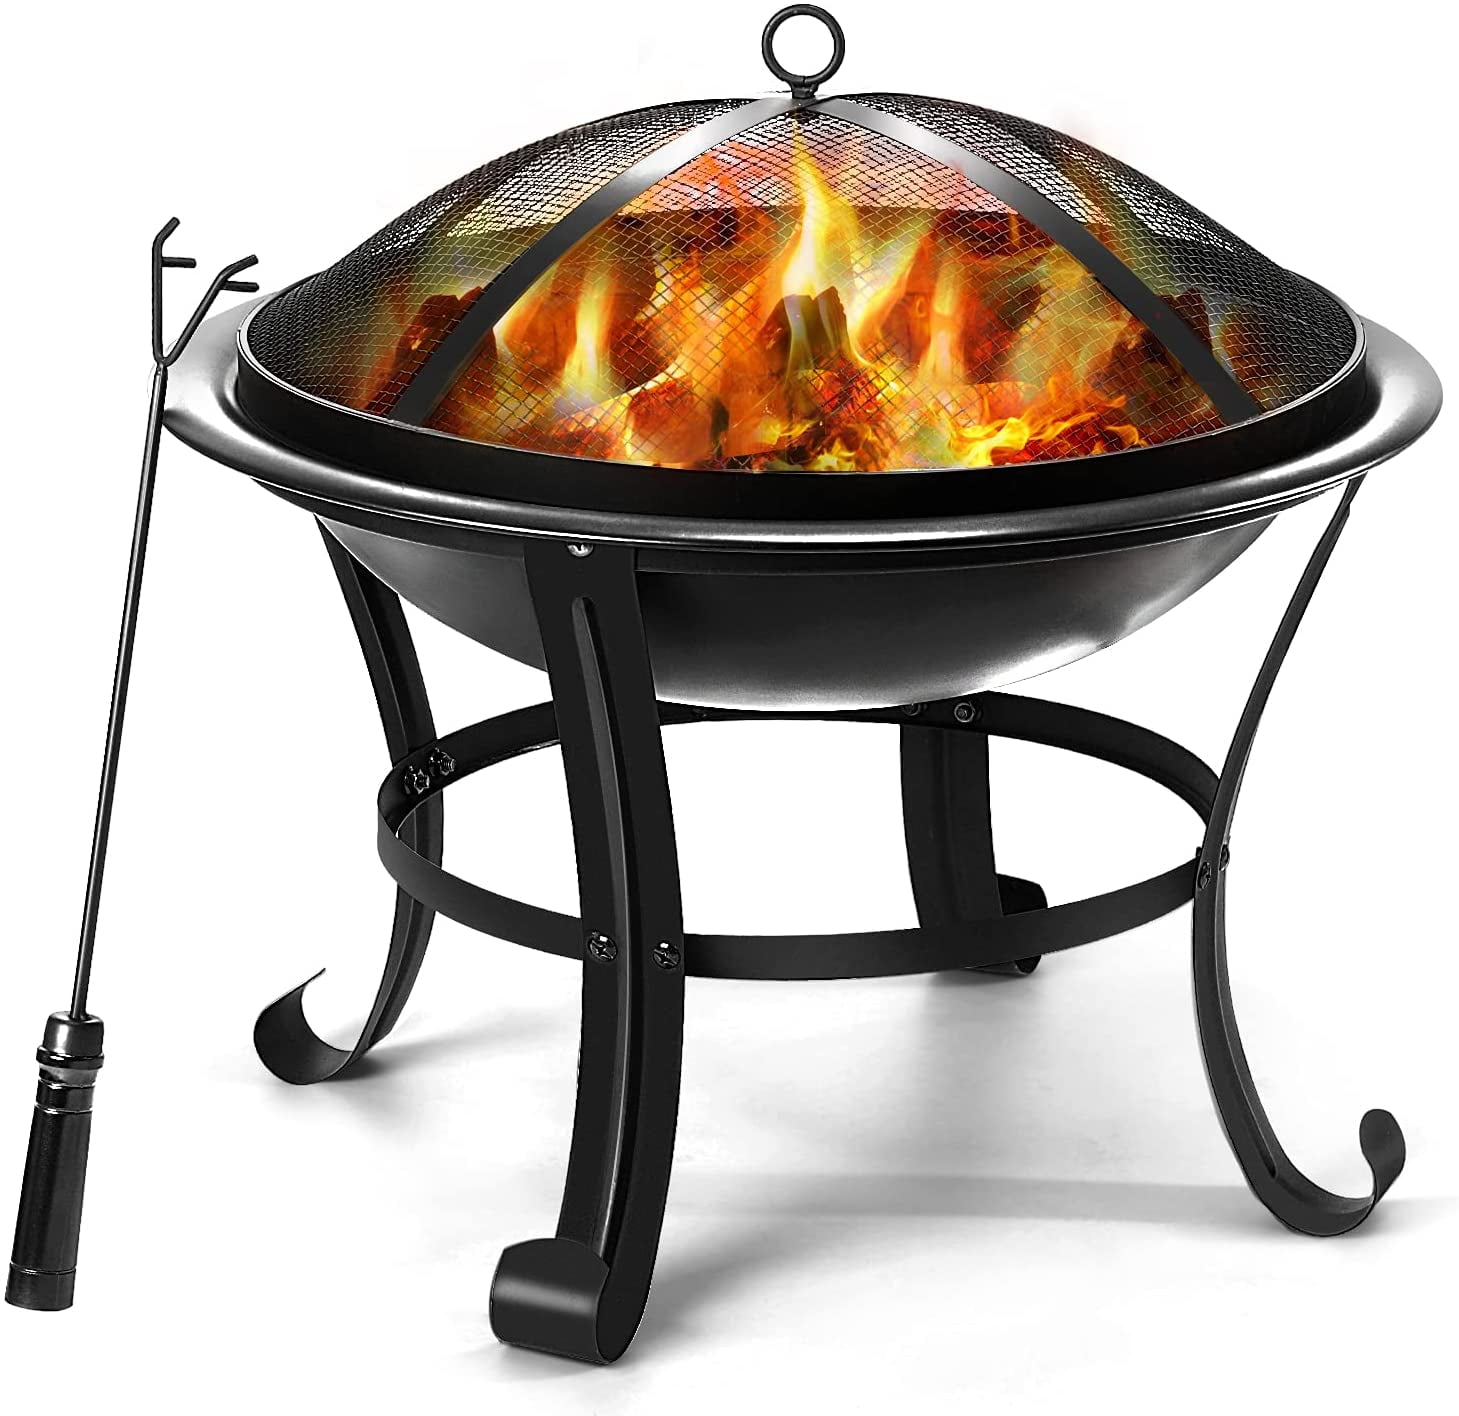 OOX Fire Pit 22 Fire Pit Outdoor Wood Burning Steel BBQ Grill Firepit Bowl with Mesh Spark Screen Over Log Grate Wood Fire Poker for Outdoor 